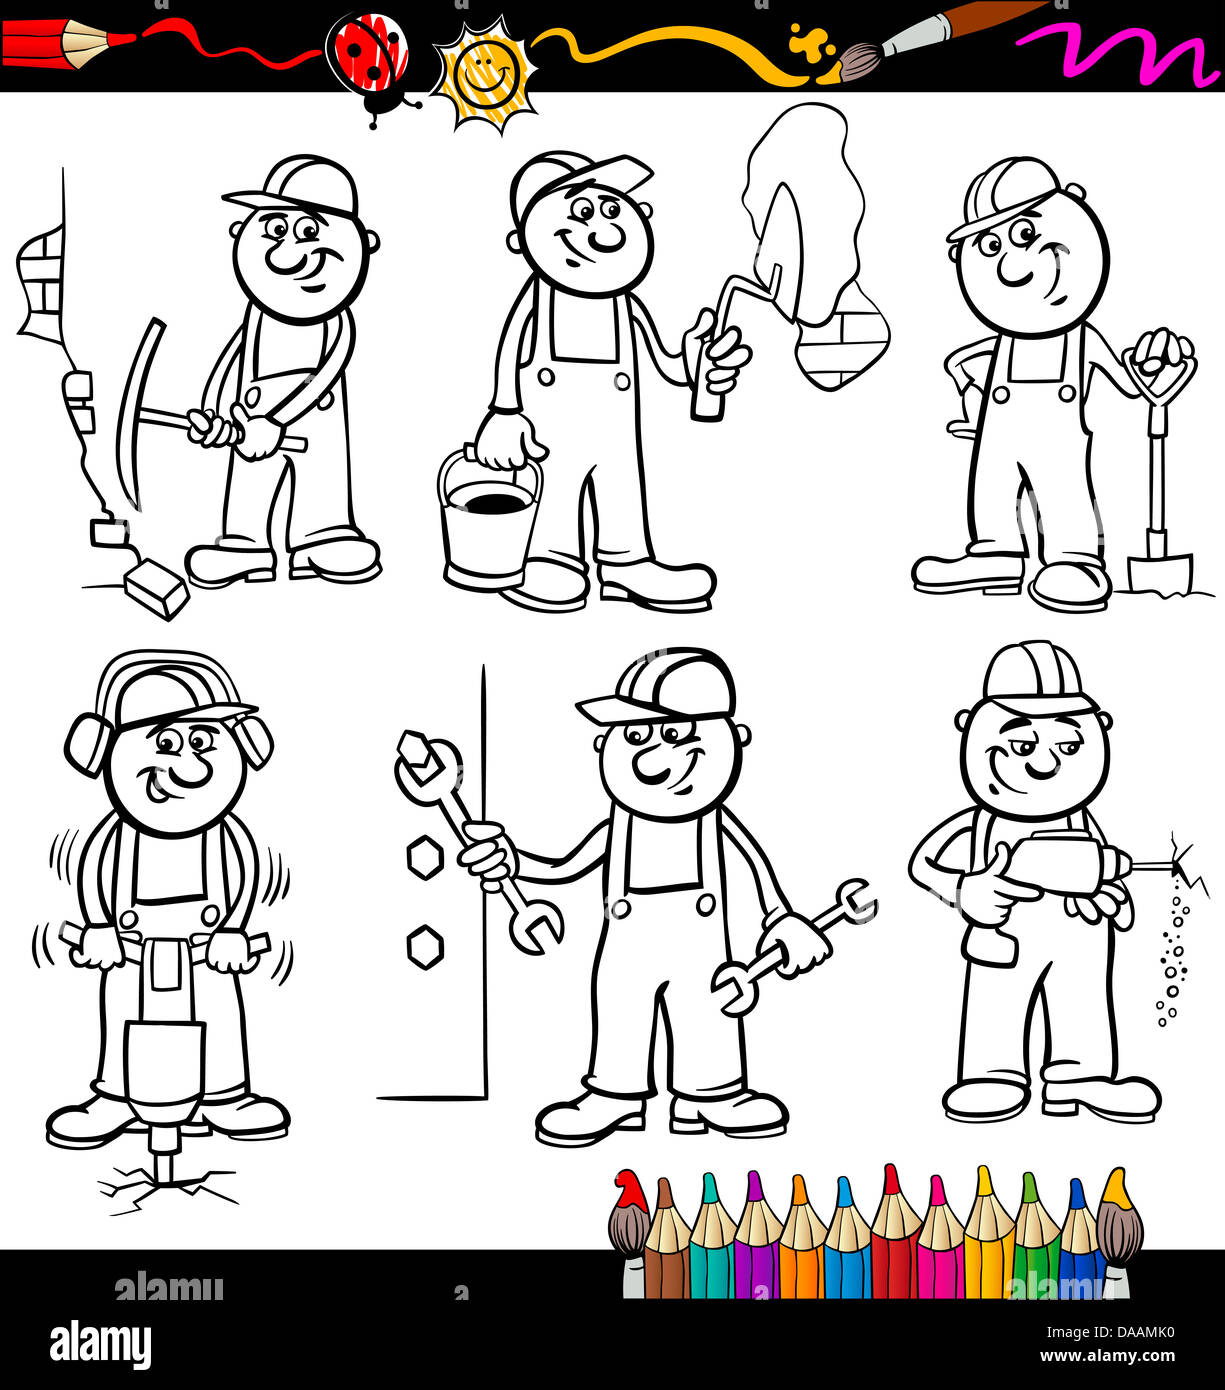 Coloring Book or Page Cartoon Illustration of Black and White Funny Manual Workers or Workmen at Work Characters Set Stock Photo